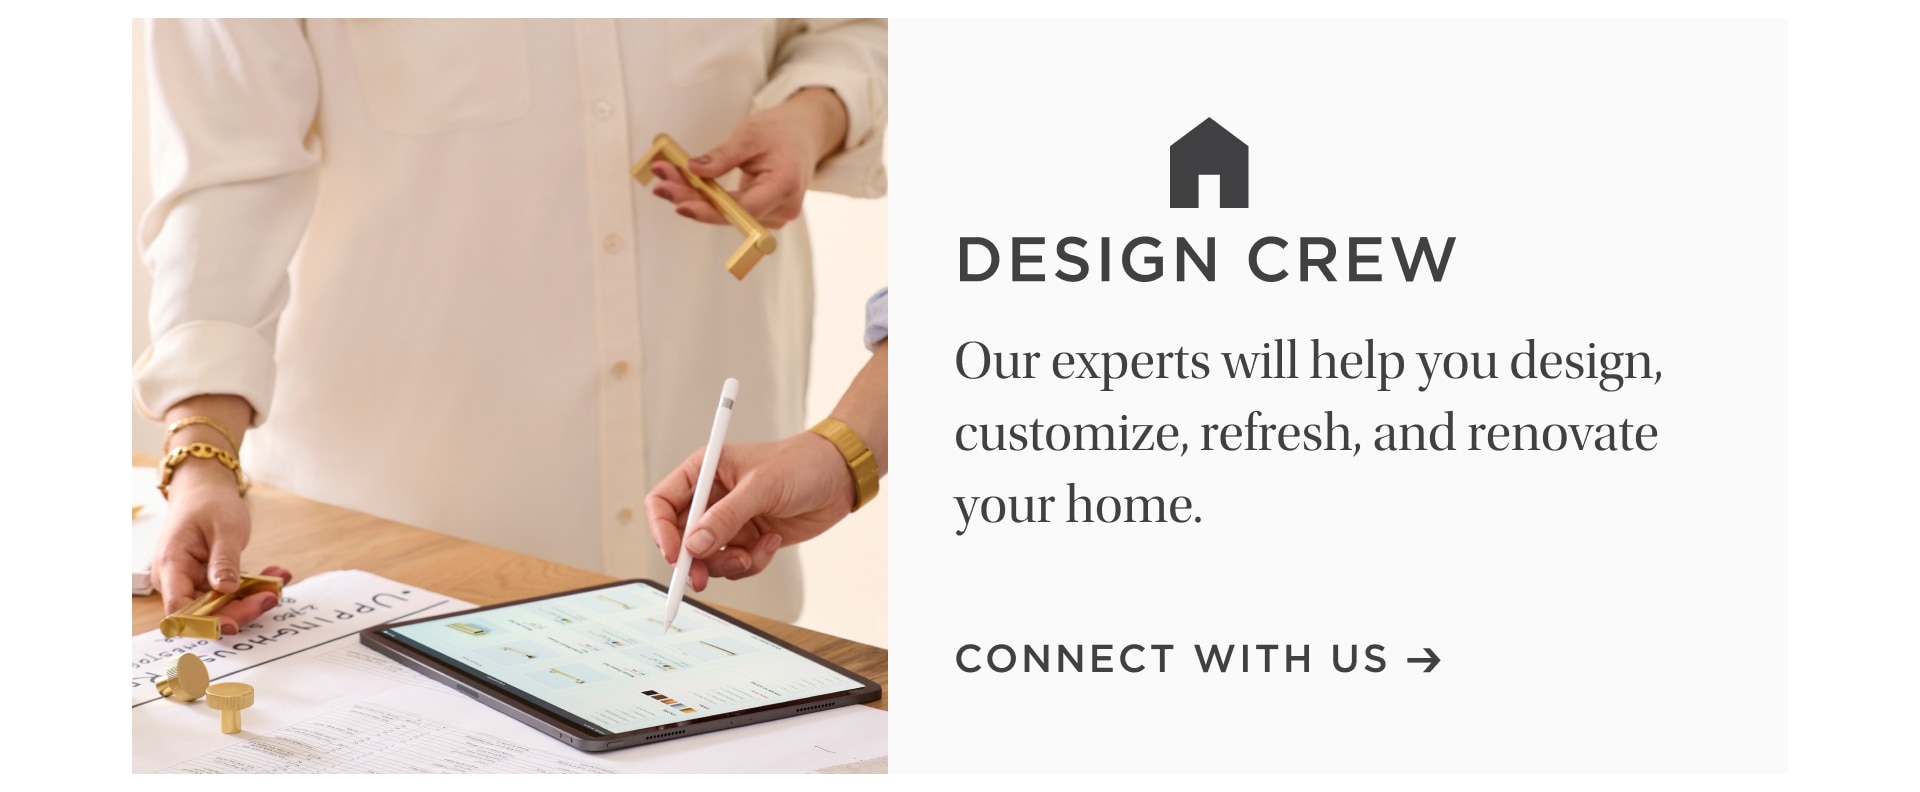 DESIGN CREW - CONNECT WITH US